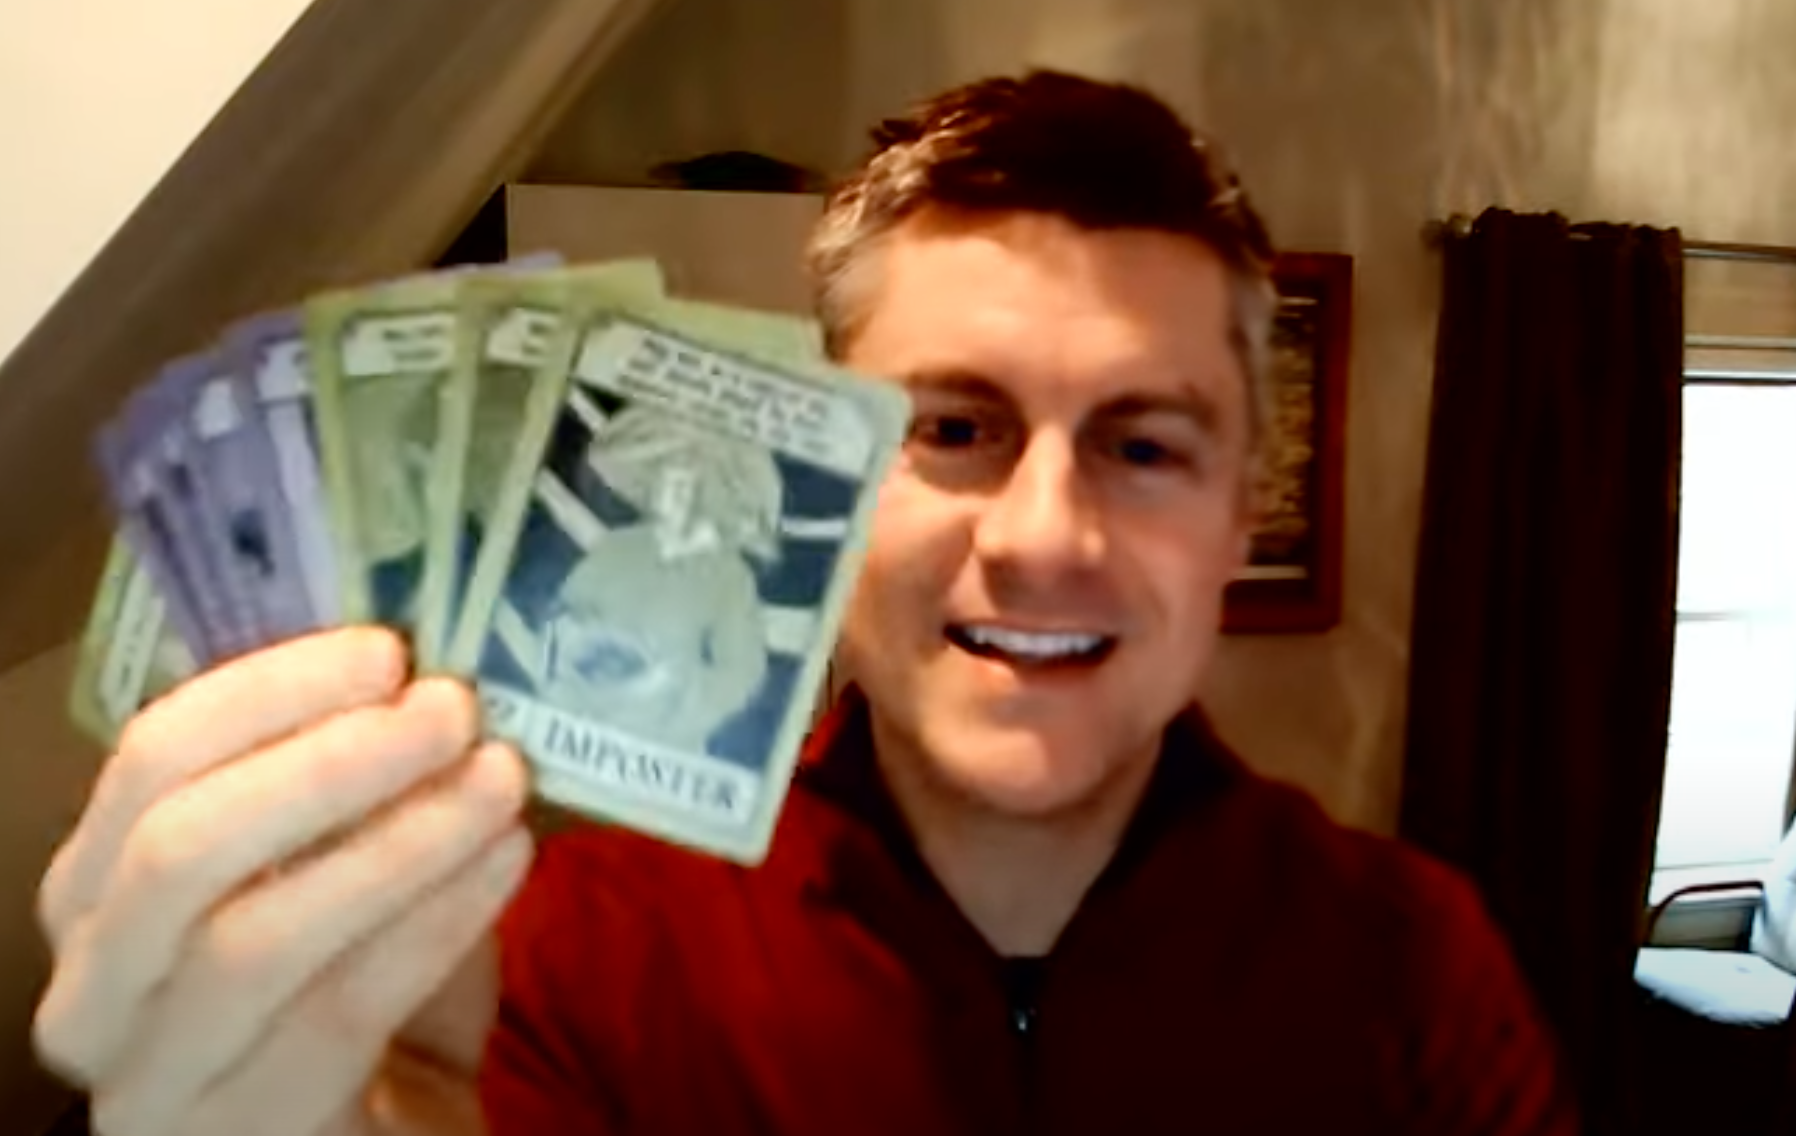 Jamey Stegmaier (prolific designer and publisher of board games Scythe, Viticulture, and Wingspan) smiling and holding up cards from my game, Hierarchy